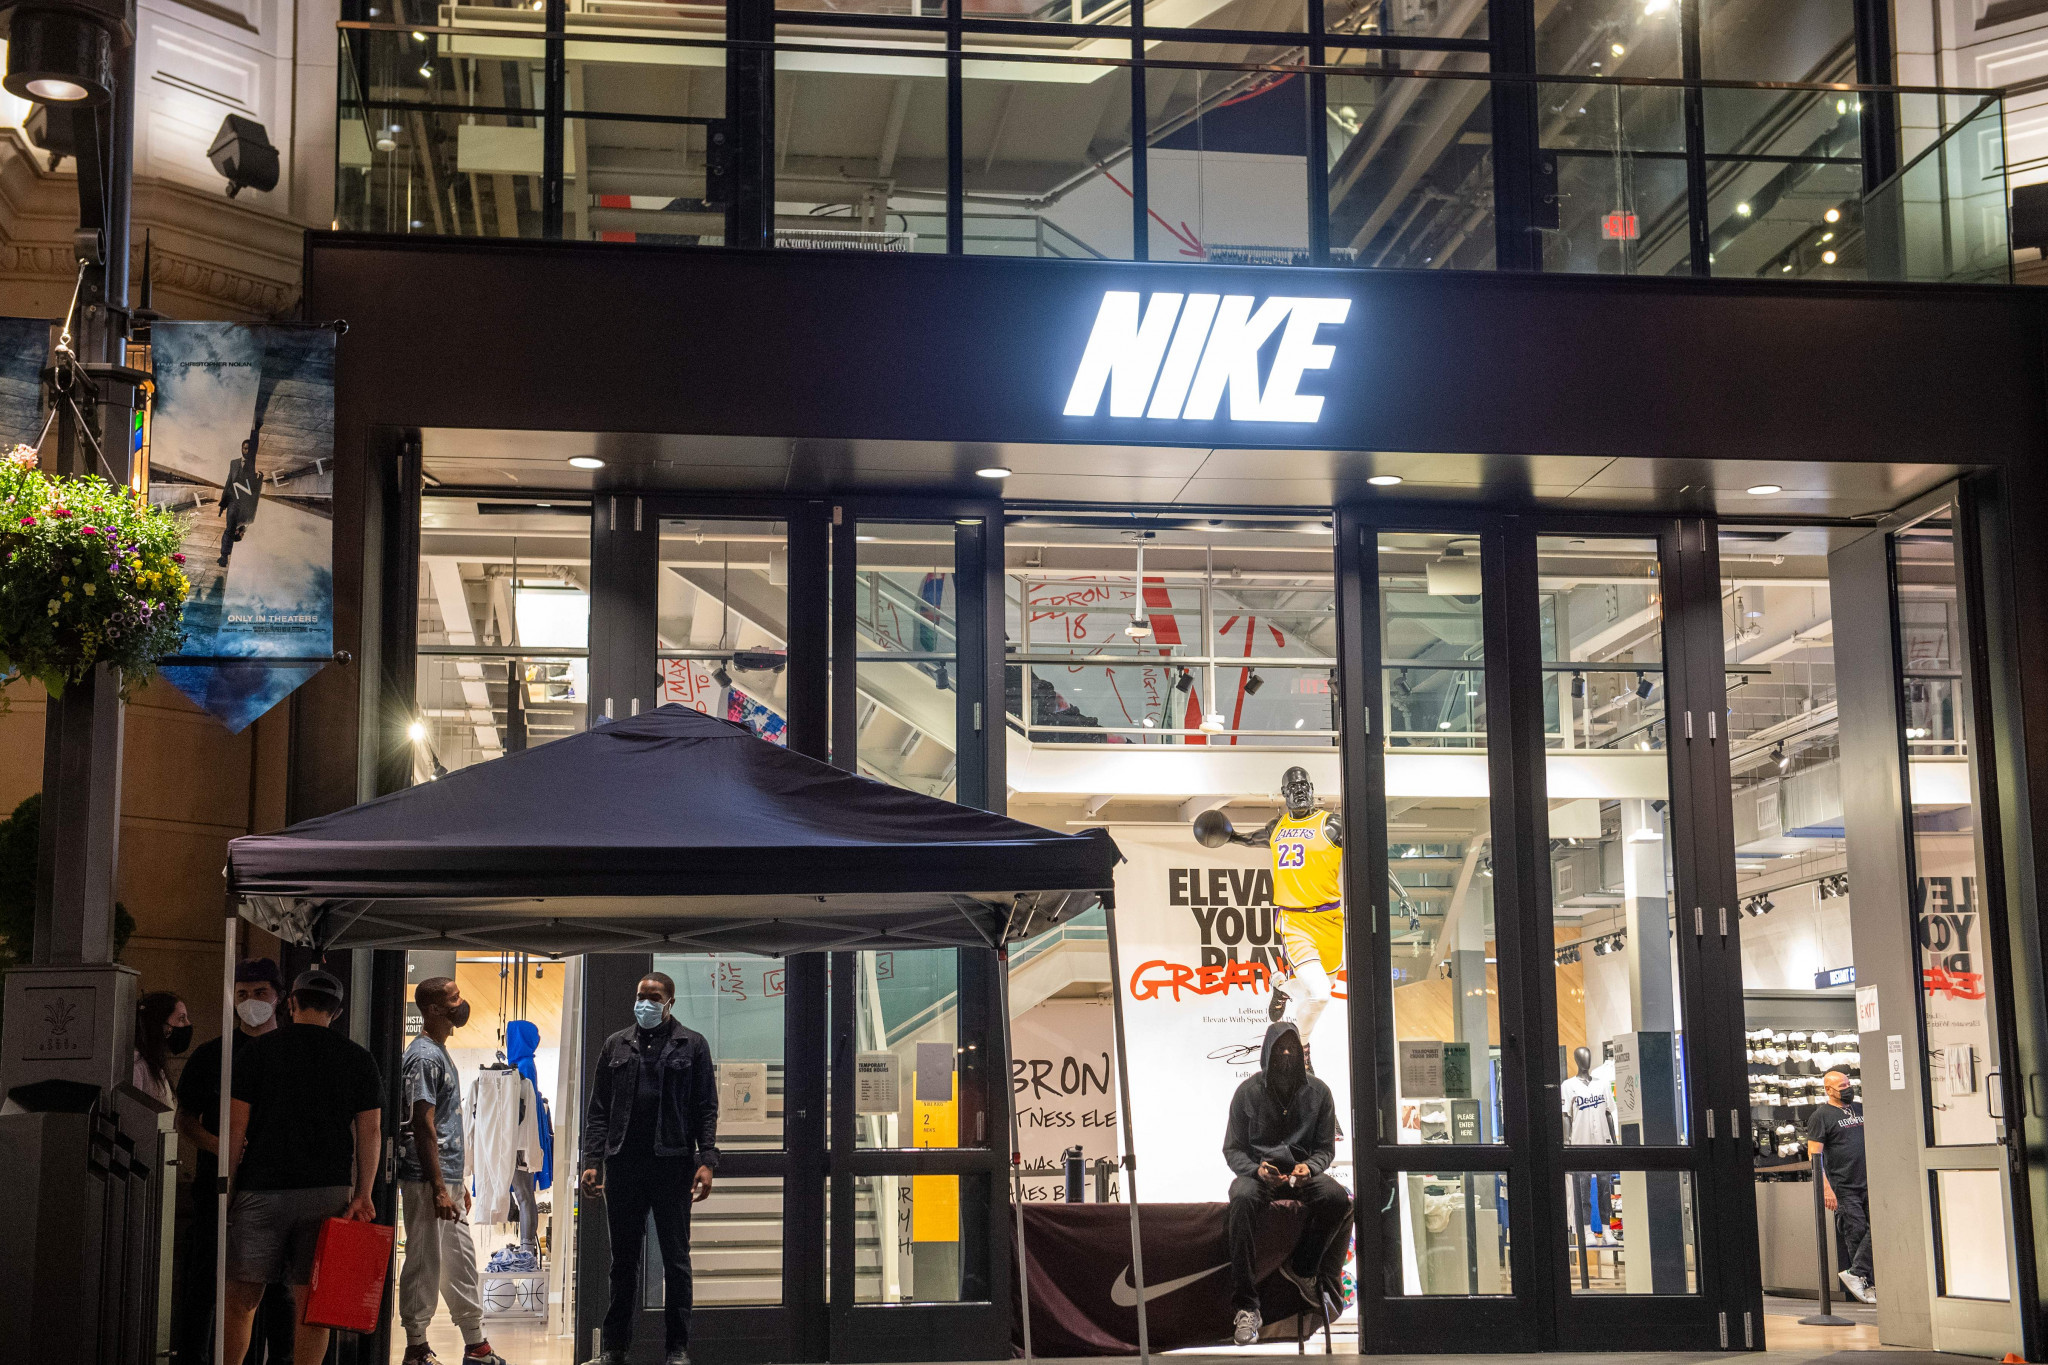 Nike said it has been impacted by the closing of stores during the COVID-19 pandemic ©Getty Images